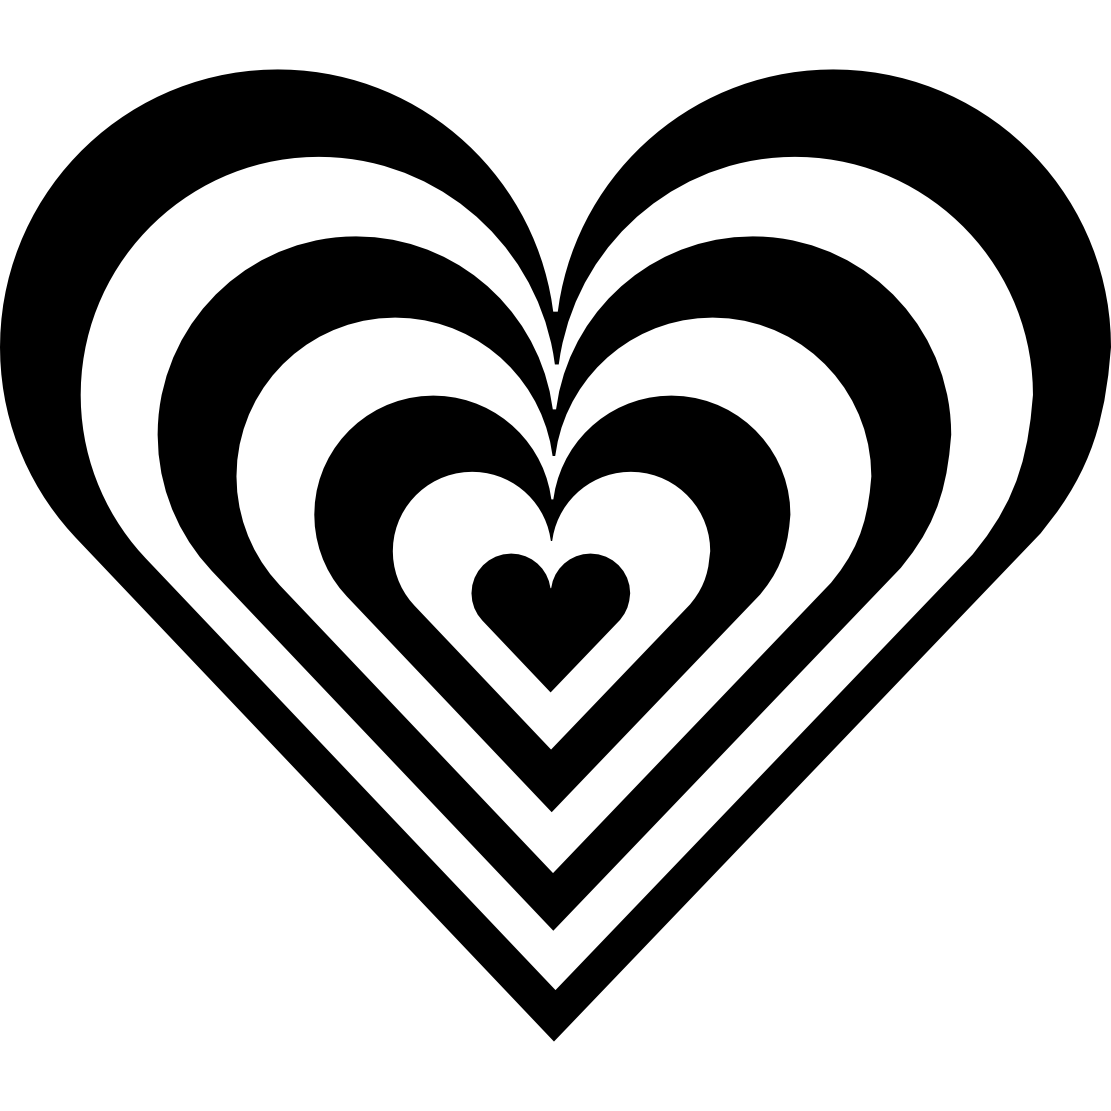 Black And White Hearts Clip Art - Clipart library